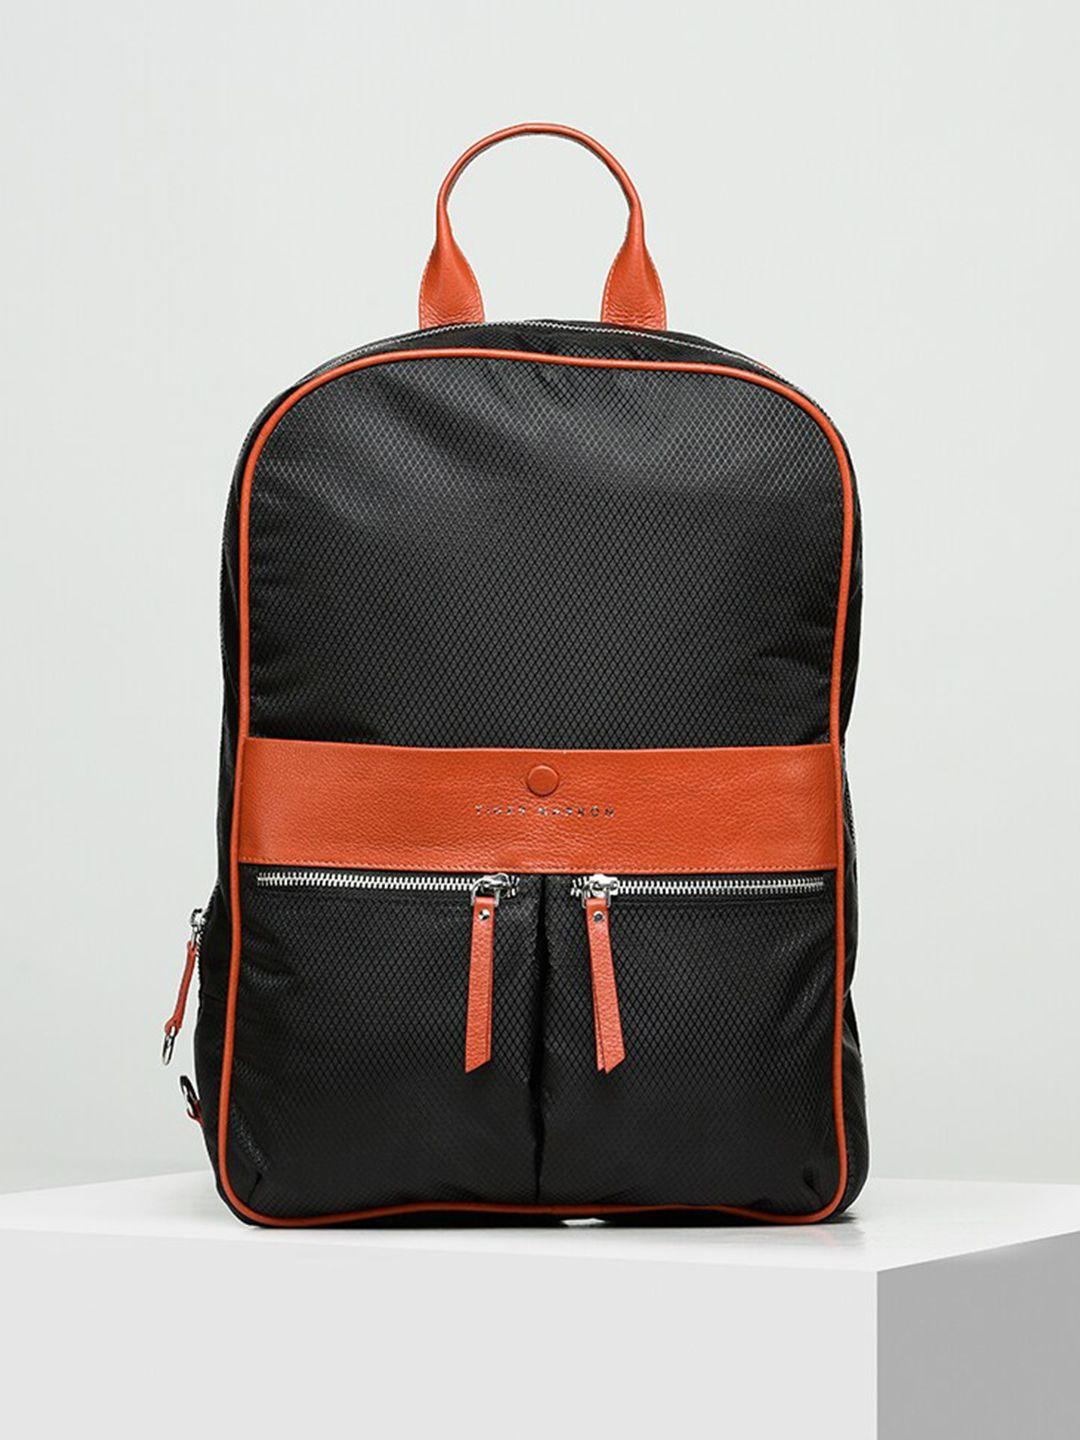 tiger marron textured climacool leather backpack